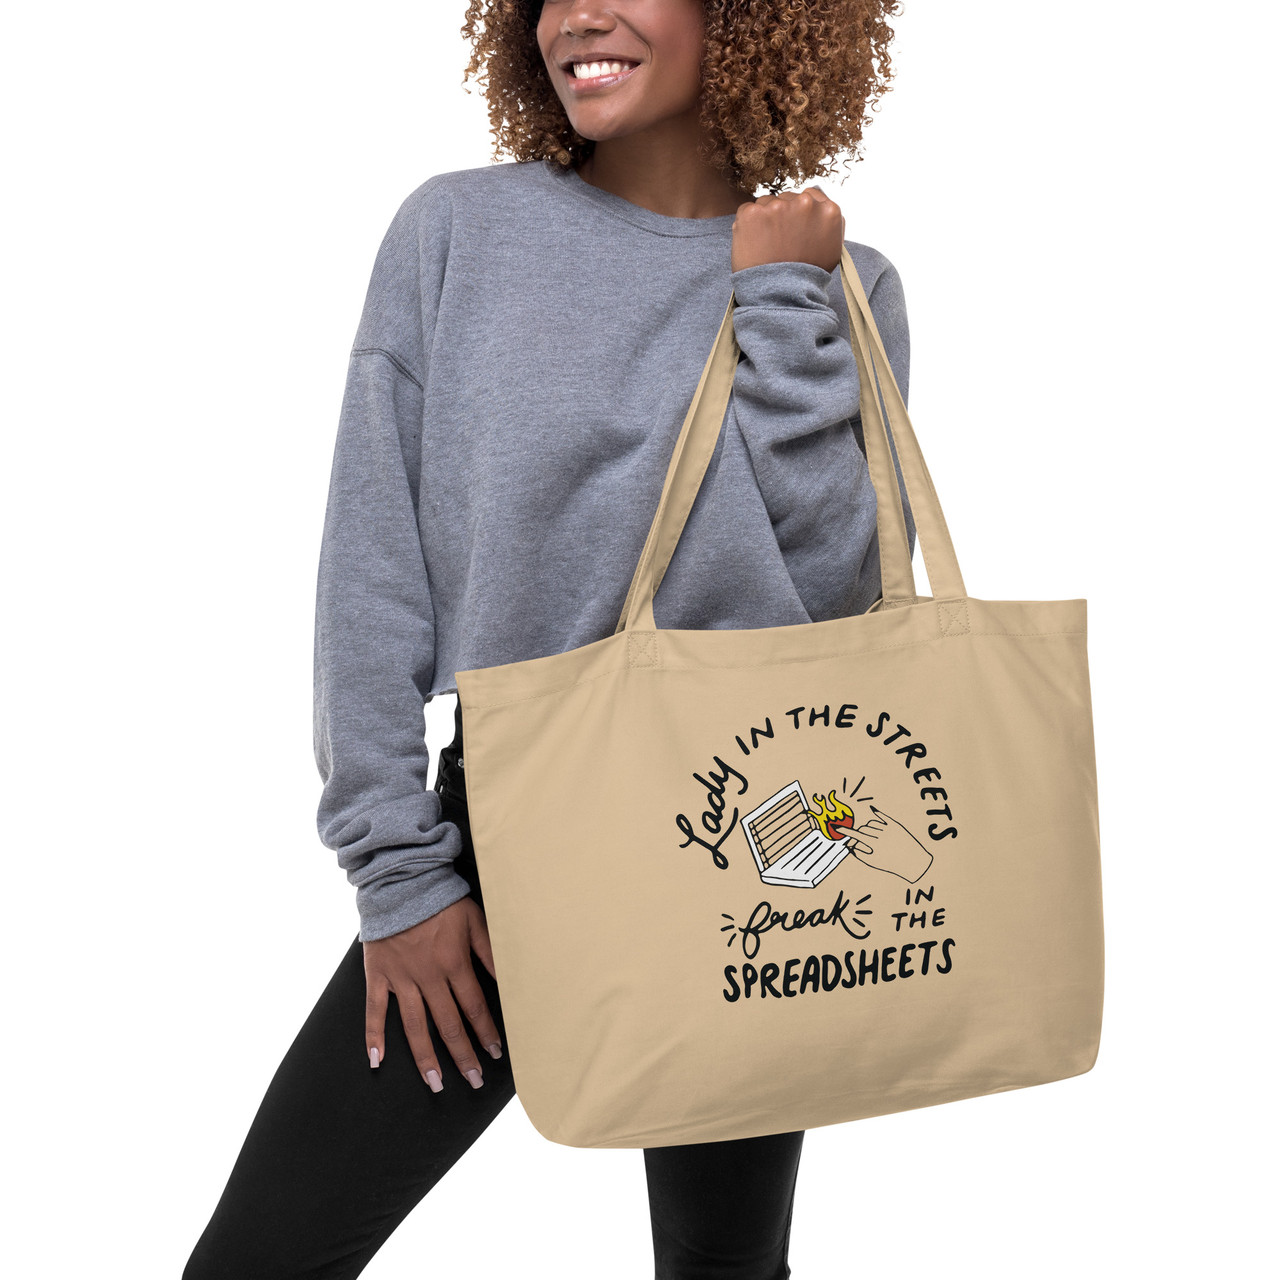 Lady In The Streets, Freak In The Spreadsheets Large Organic Tote Bag